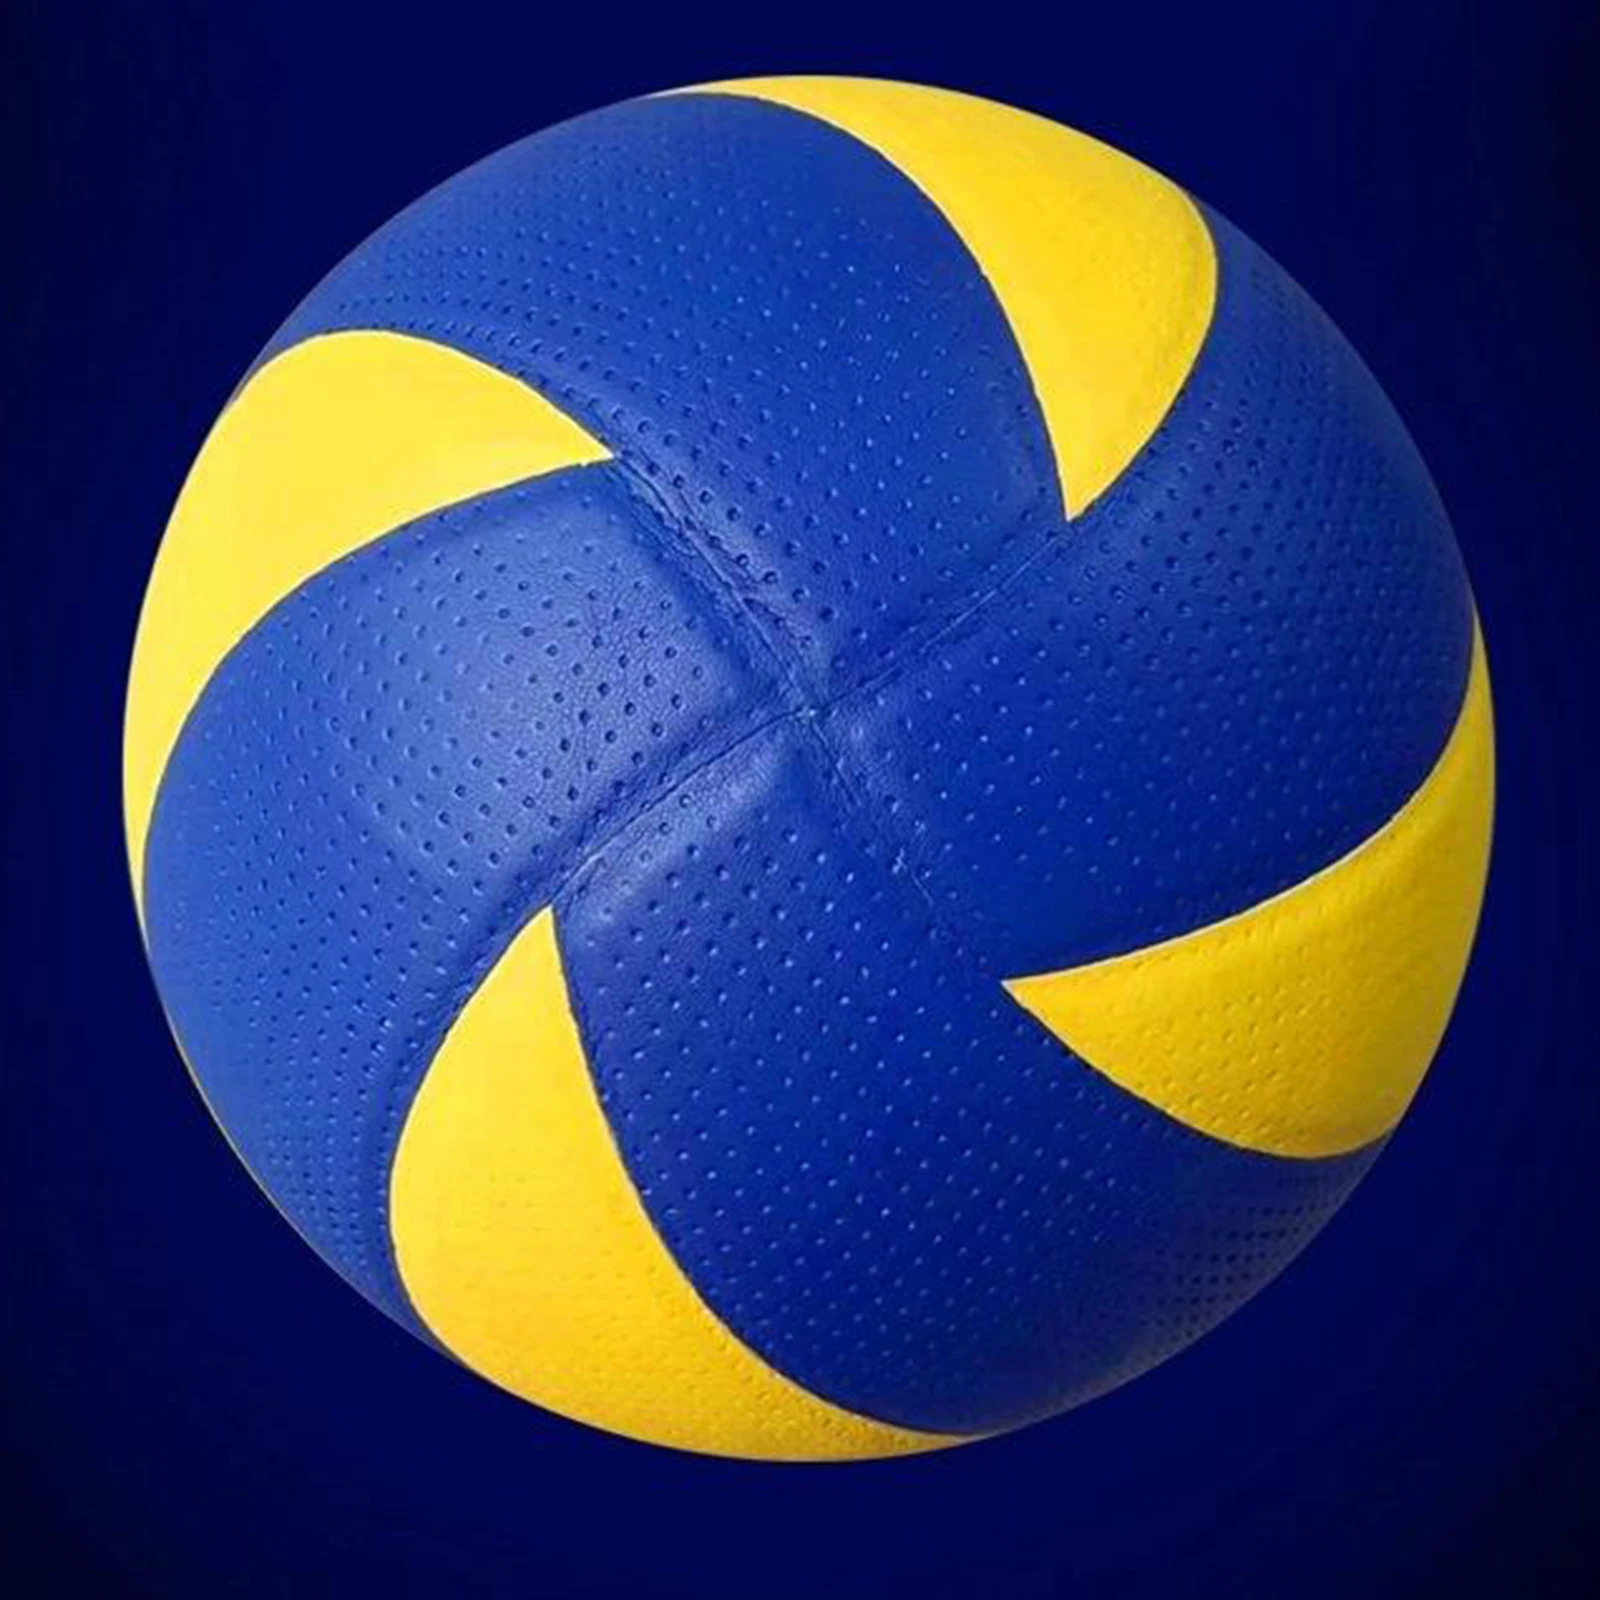 Professional Standard Size 5 Beach Volleyball Ball for Kids Adults Gym